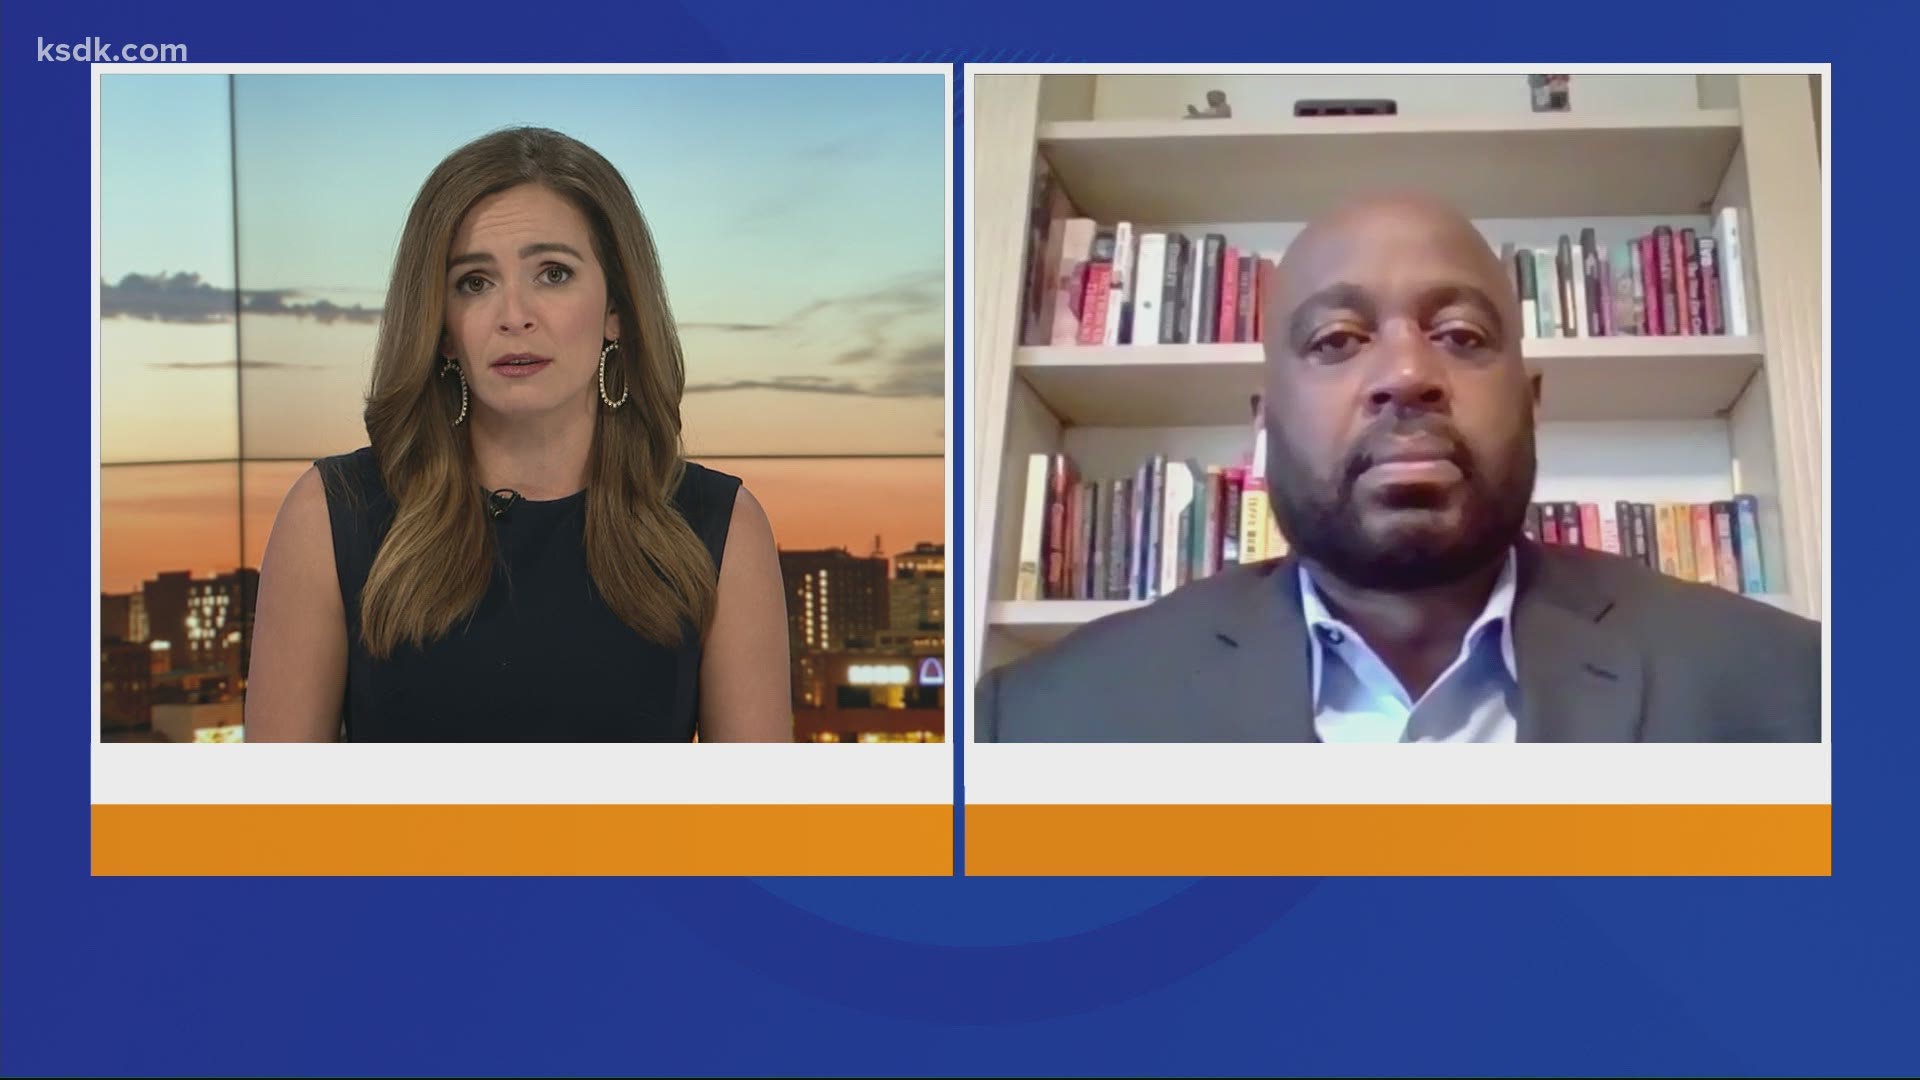 "We're gonna have to admit that we've got some cultural issues within our justice system. We have to begin to have real conversations," Johnson said.